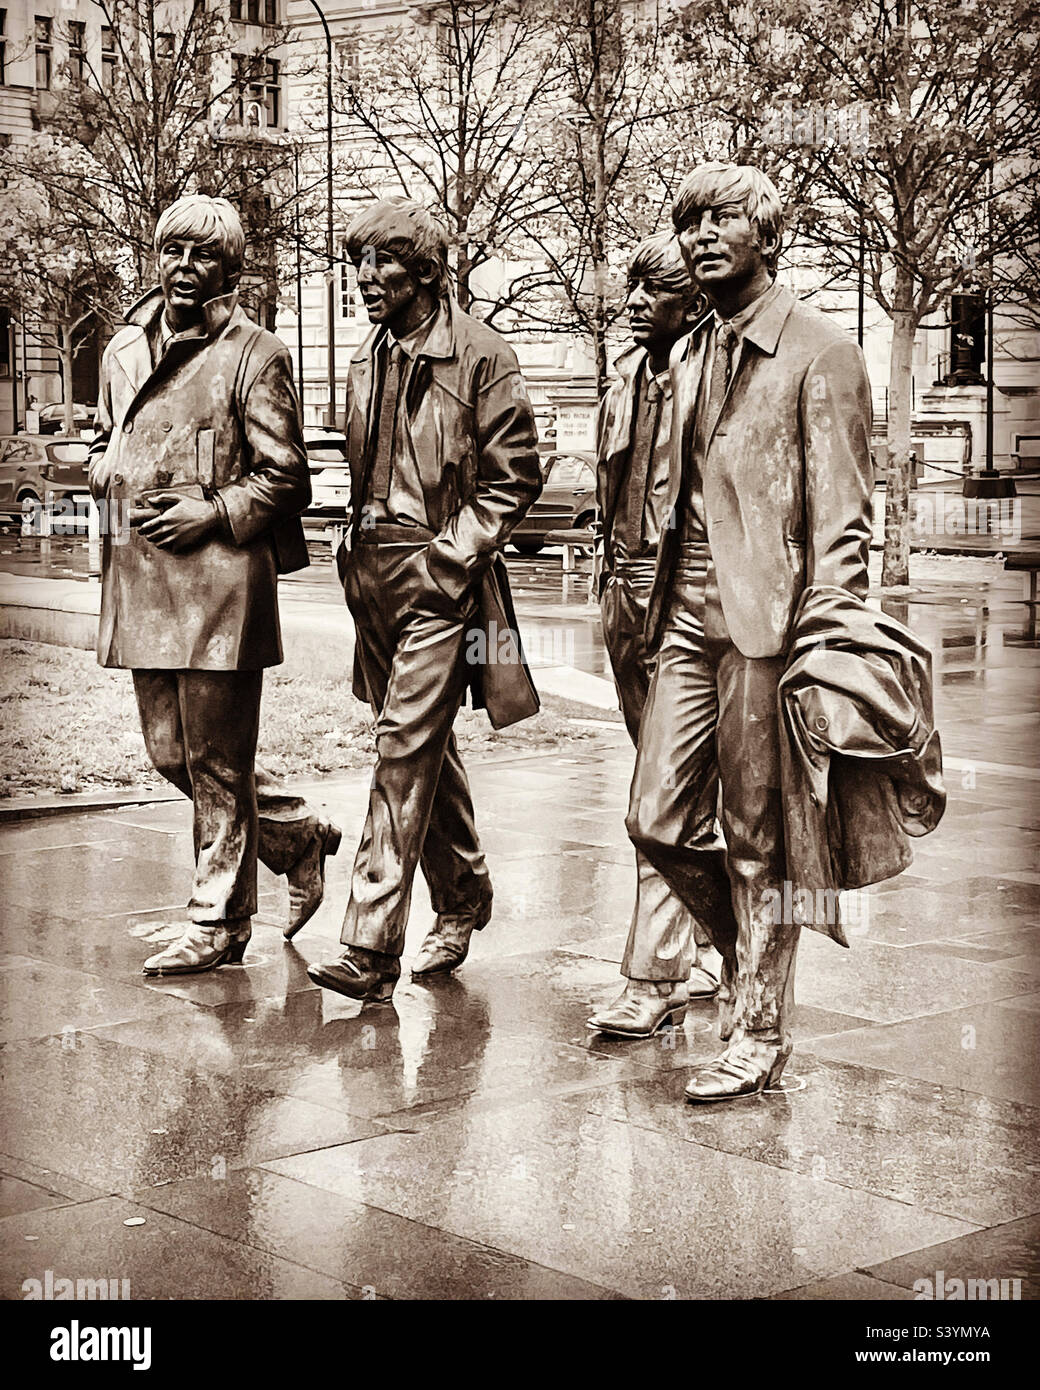 Beatles Statue, Pier Head, Liverpool L3 1BY Stock Photo